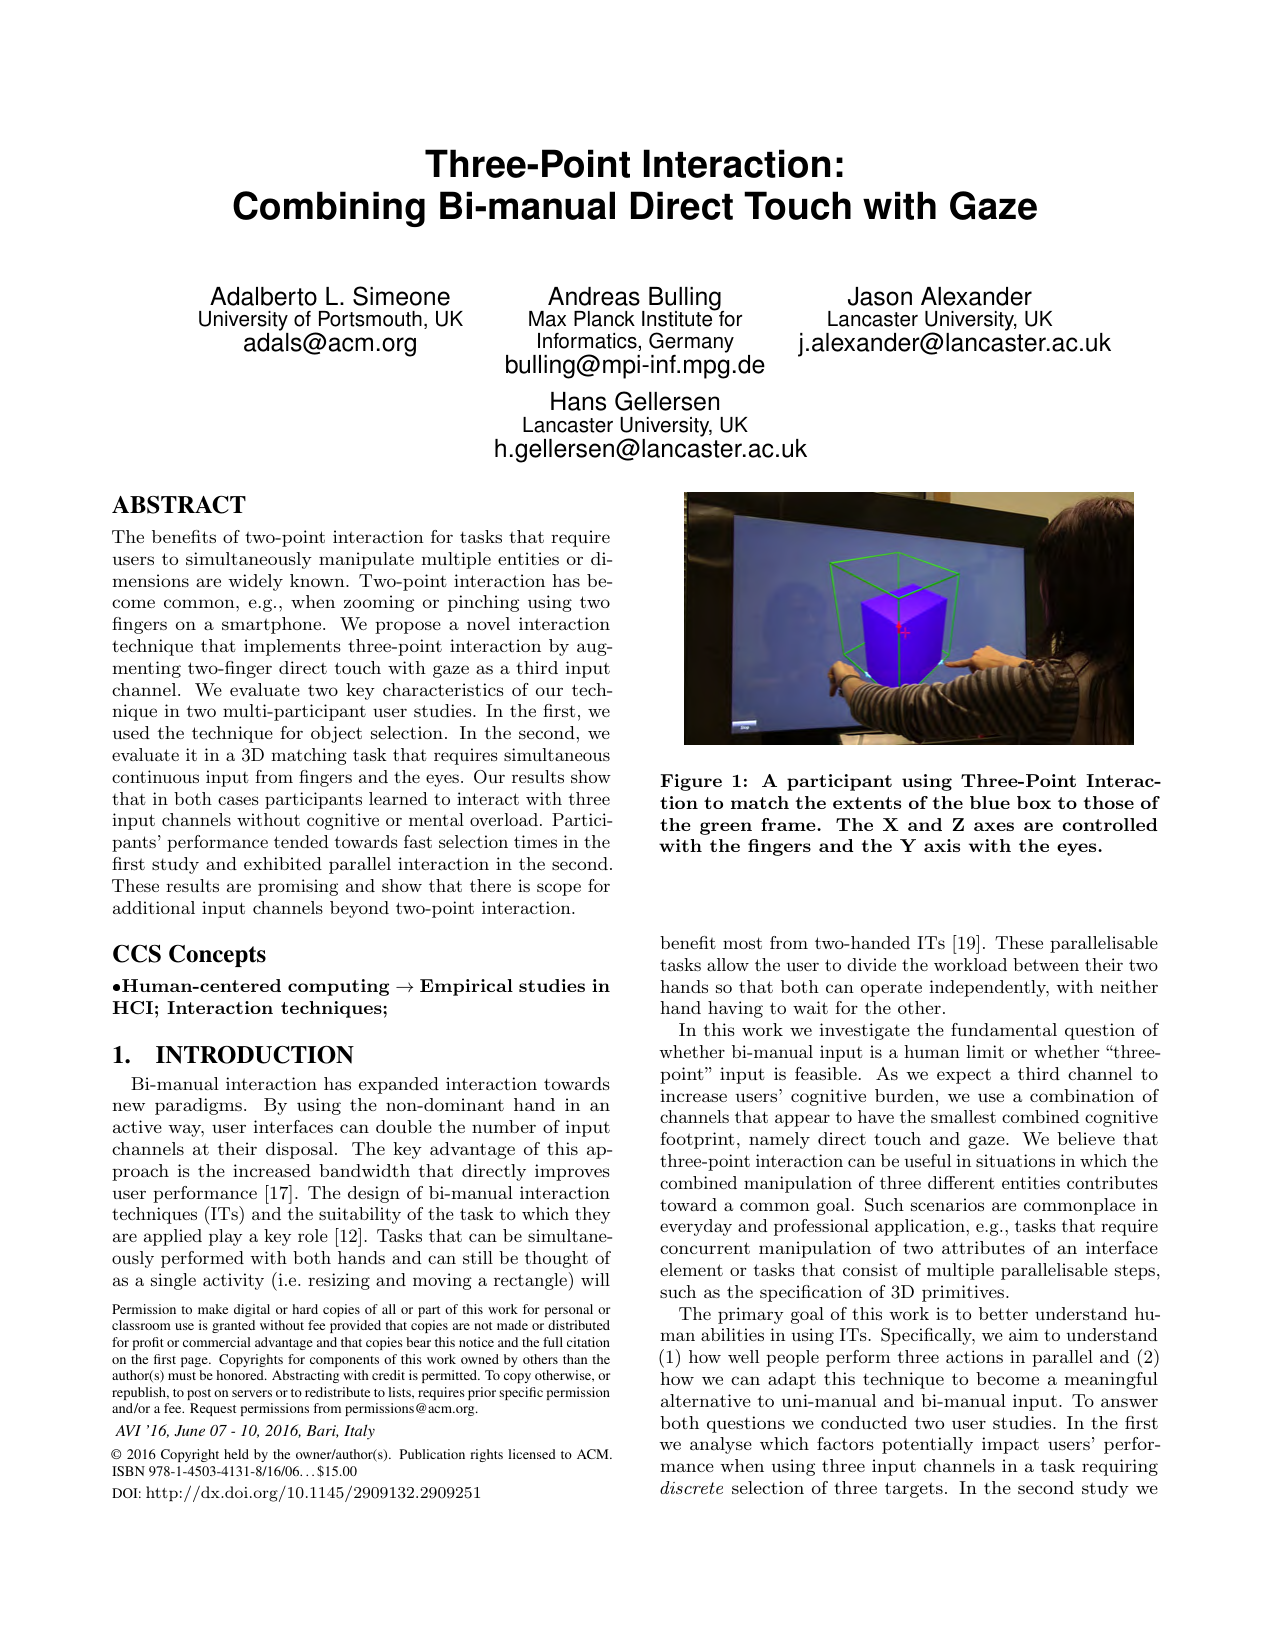 Three-Point Interaction: Combining Bi-manual Direct Touch with Gaze